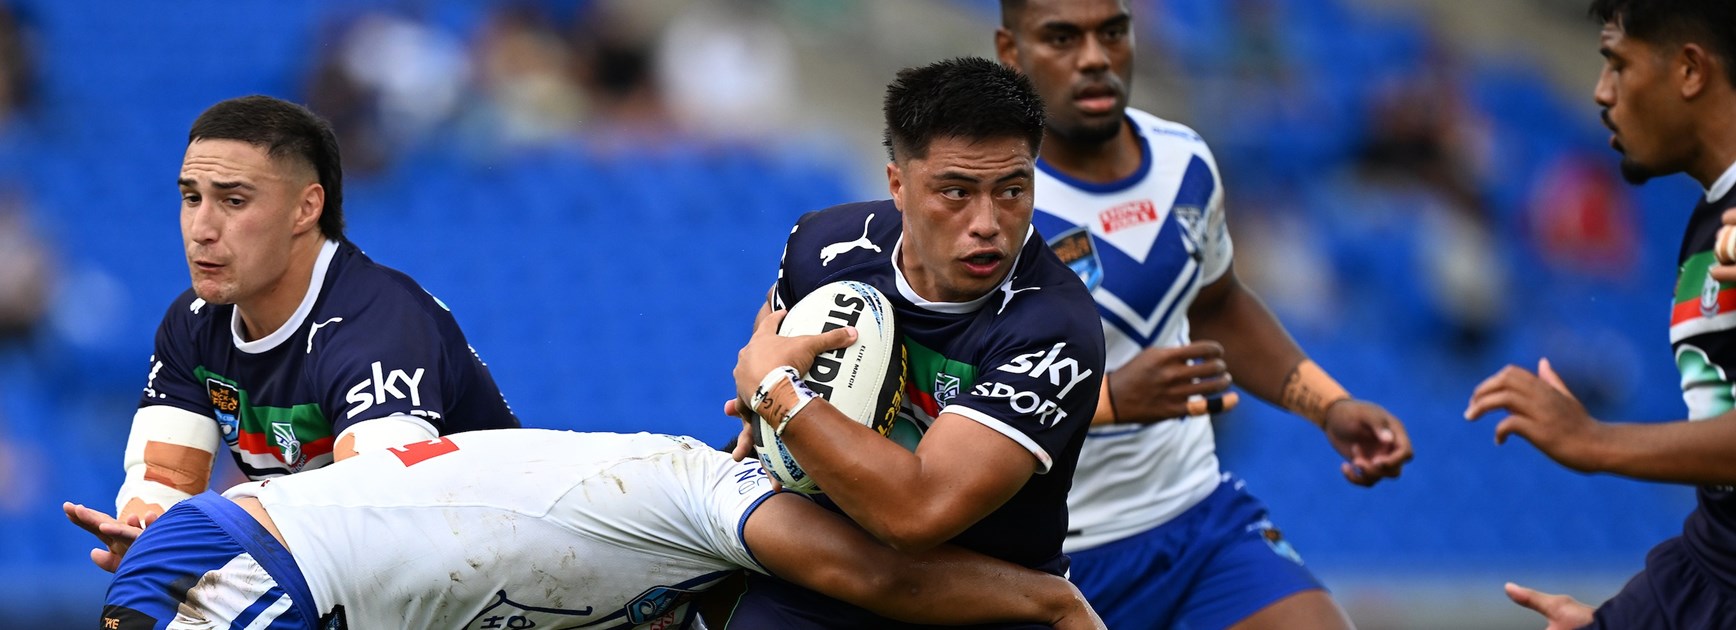 NSW Cup side chases rebound win in Newcastle